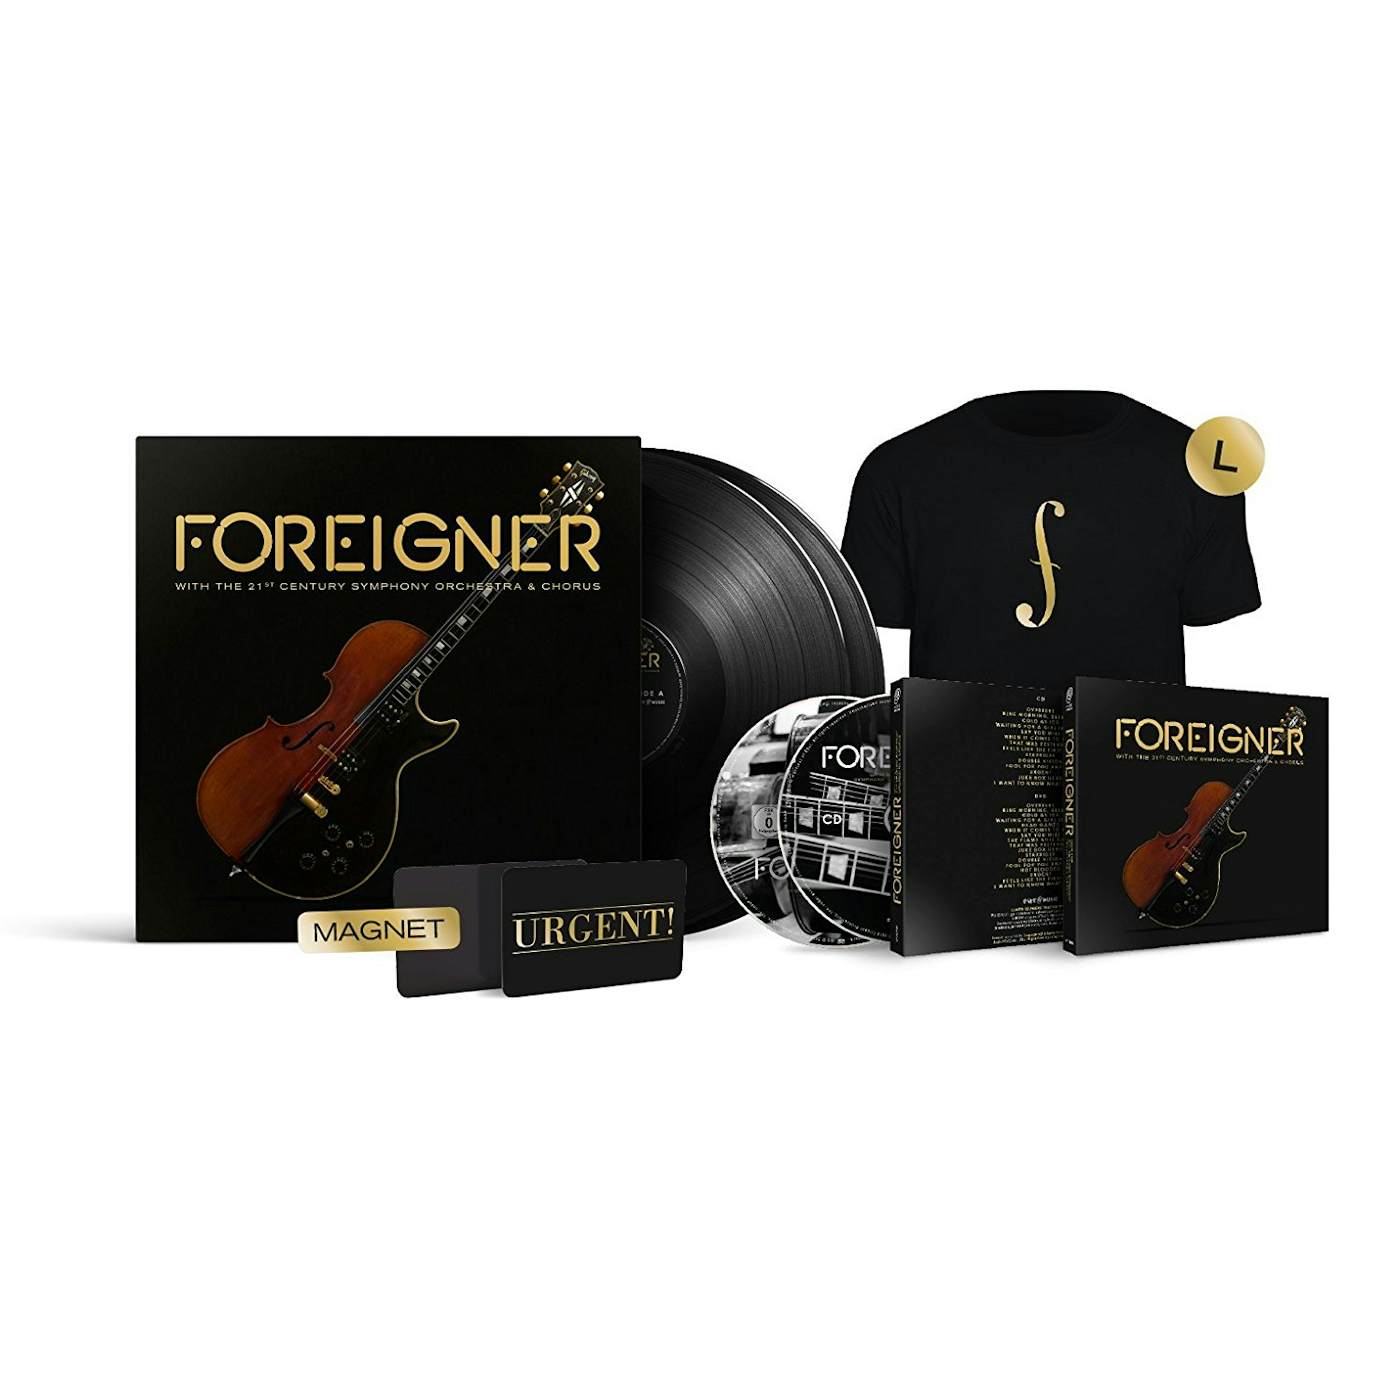 Foreigner With The 21st Century Symphony Orchestra & Chorus (box set)  Vinyl Record